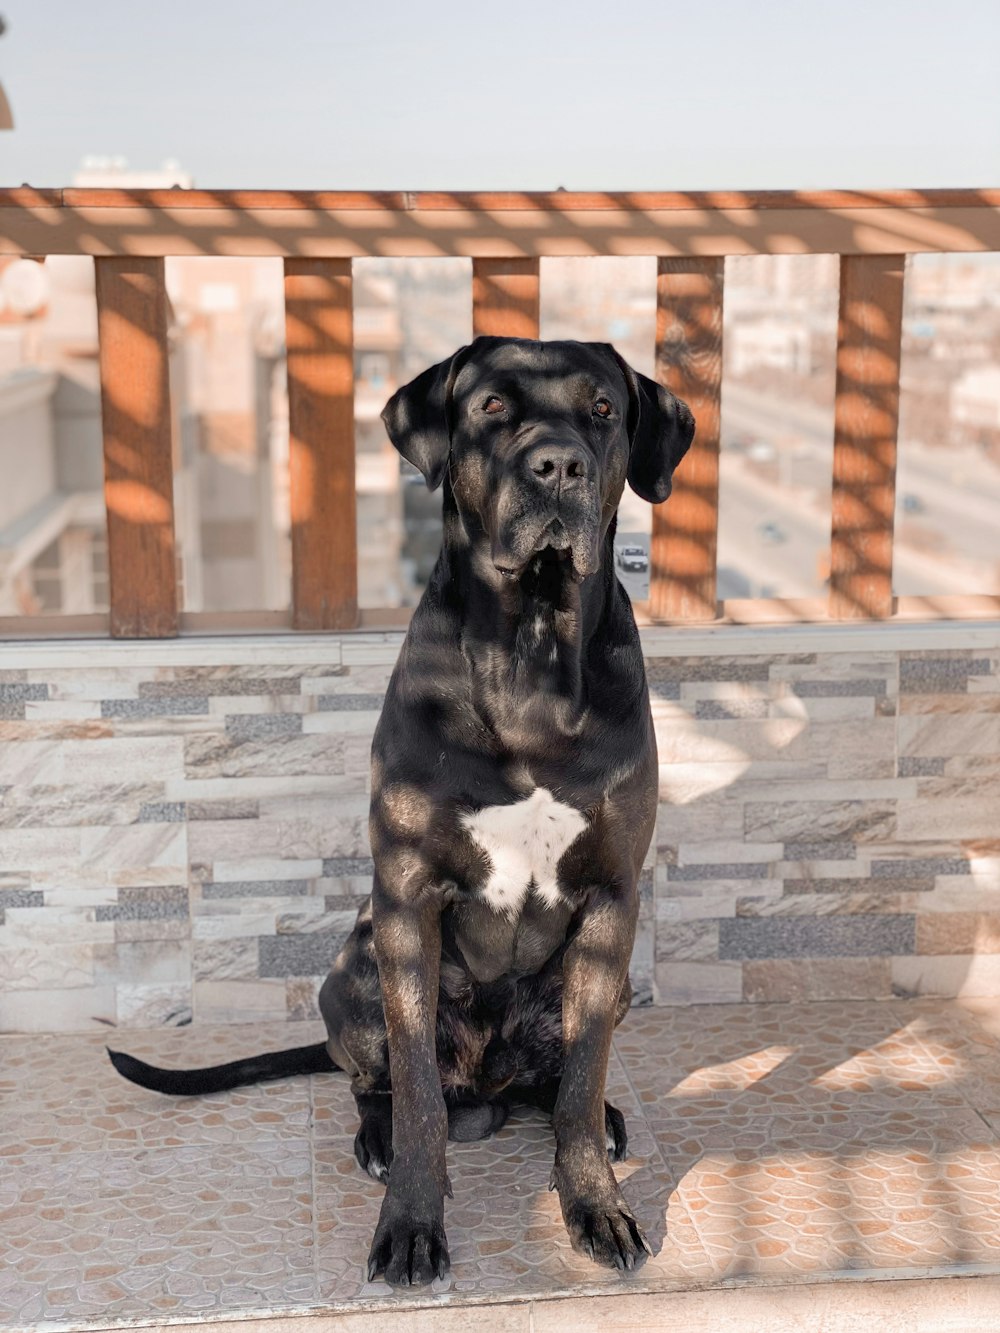 a large black dog sitting on top of a tiled floor